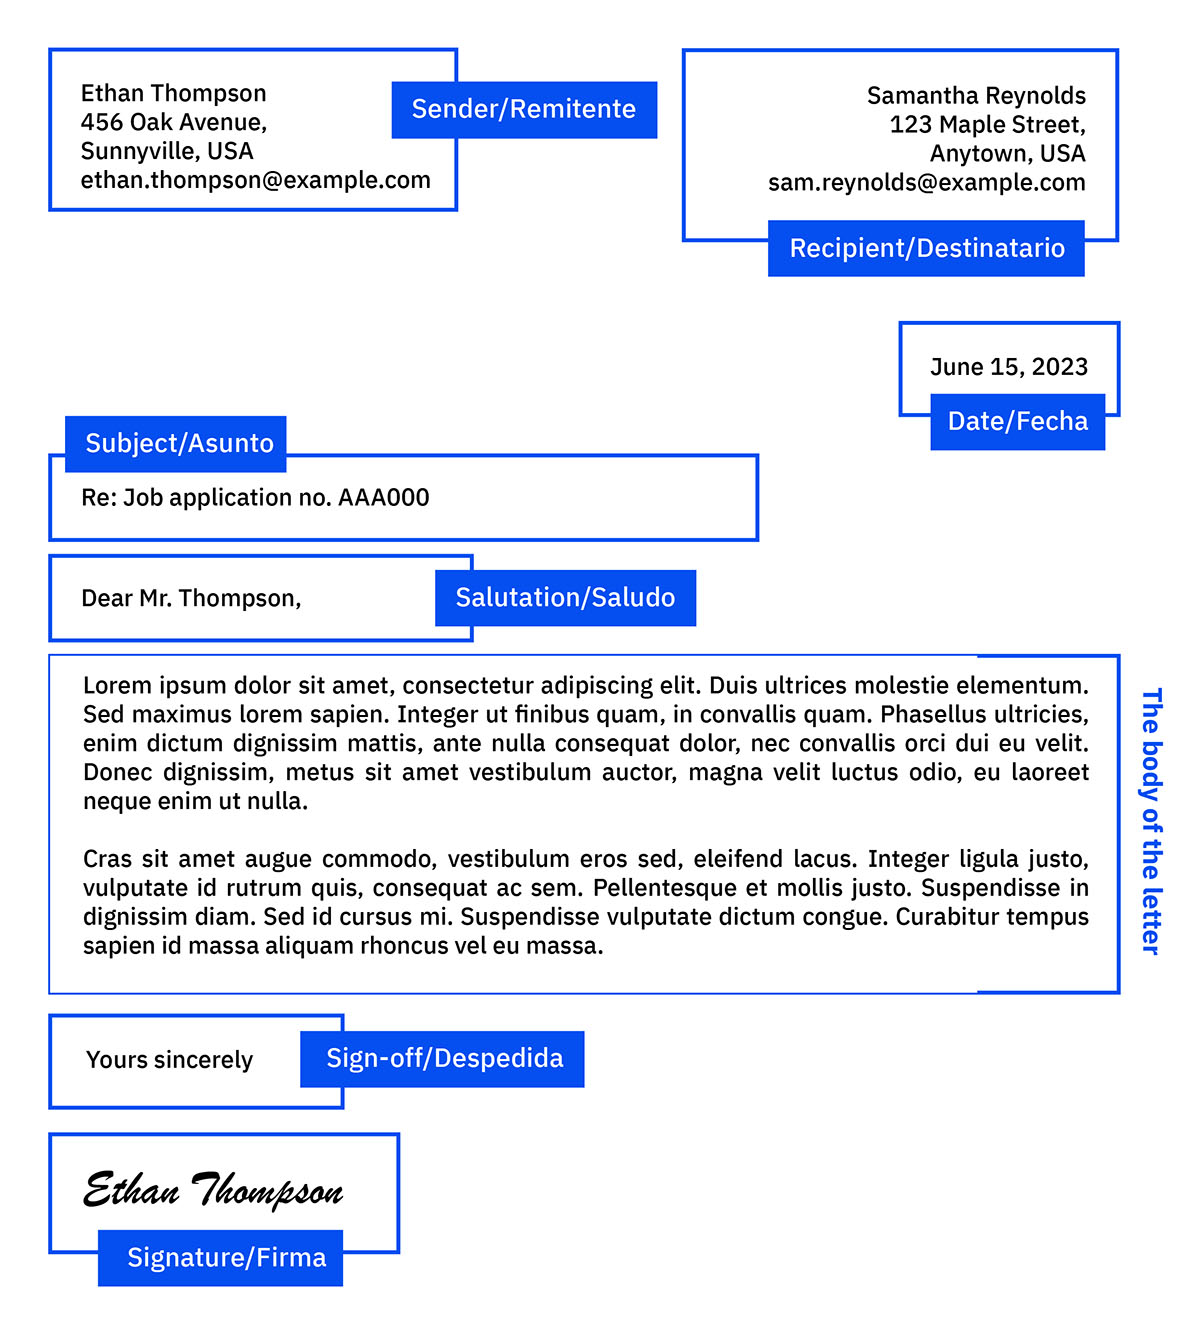 Formatting a formal or business letter in English.